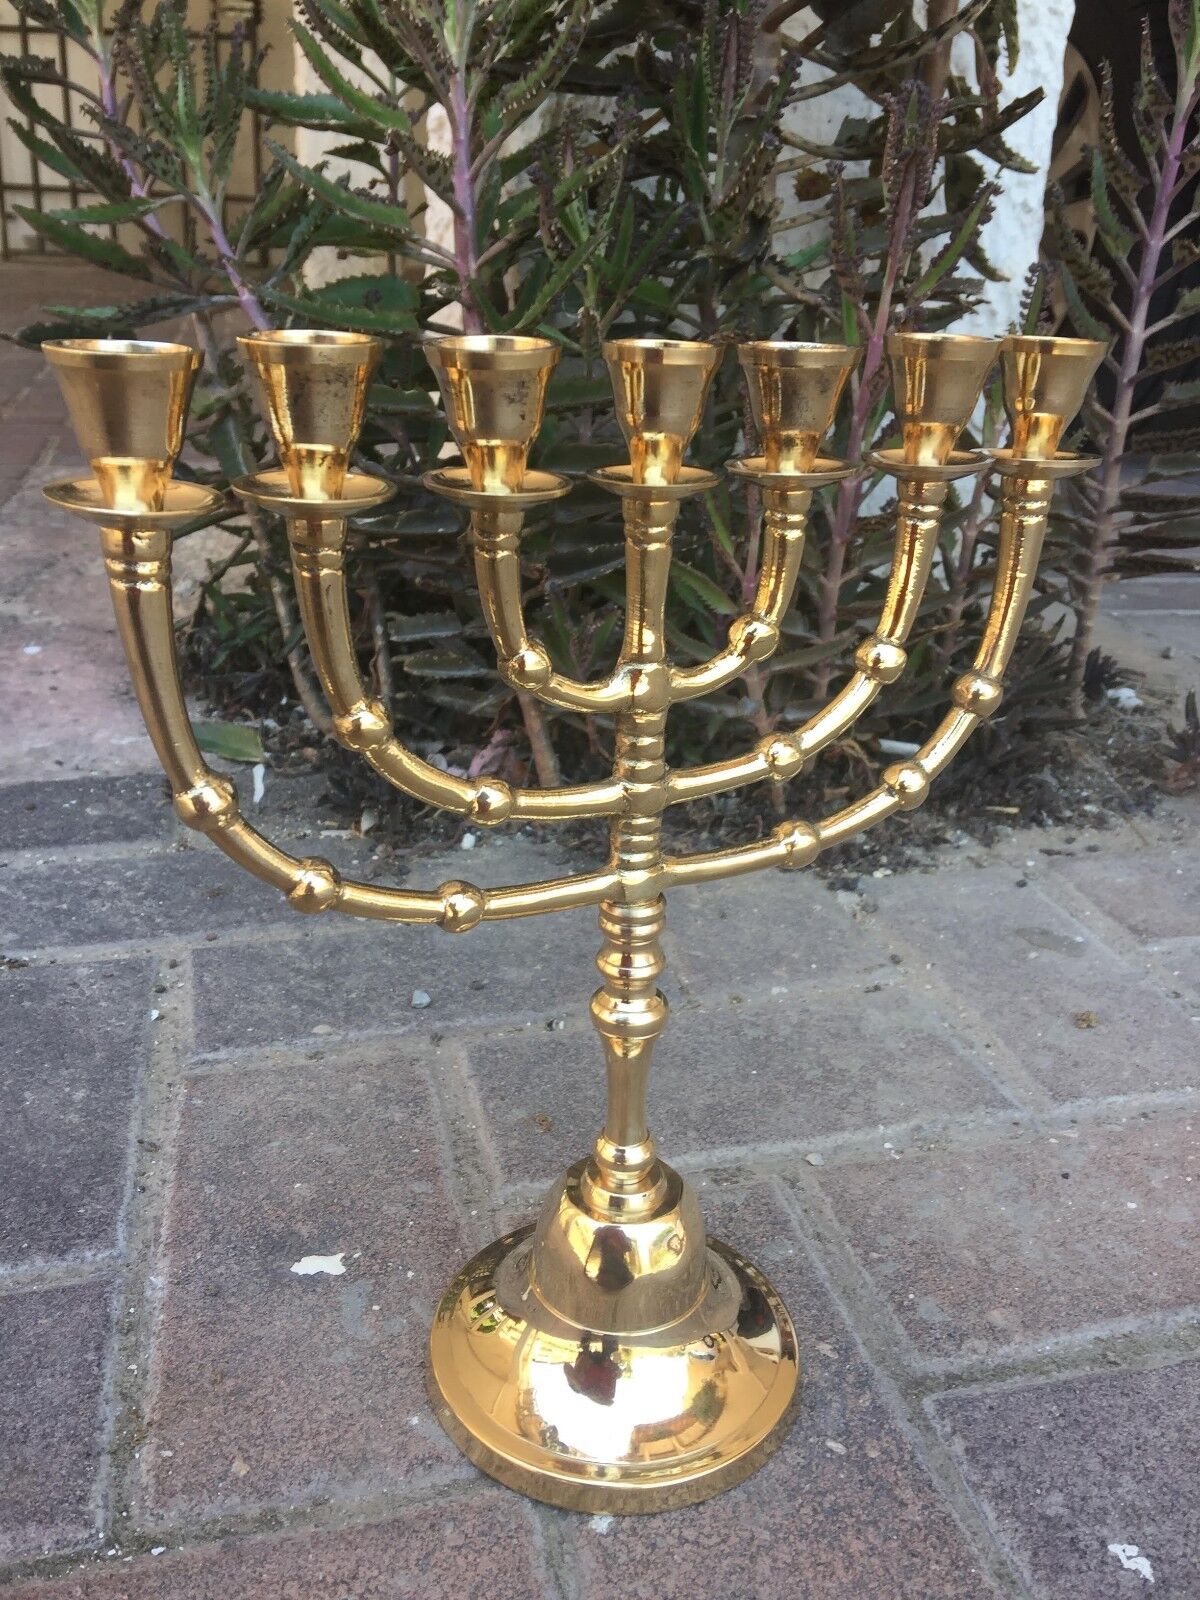 Menorah Gold Color Jerusalem Temple 10 Inch Height 26 Cm 7 Branches Brass L